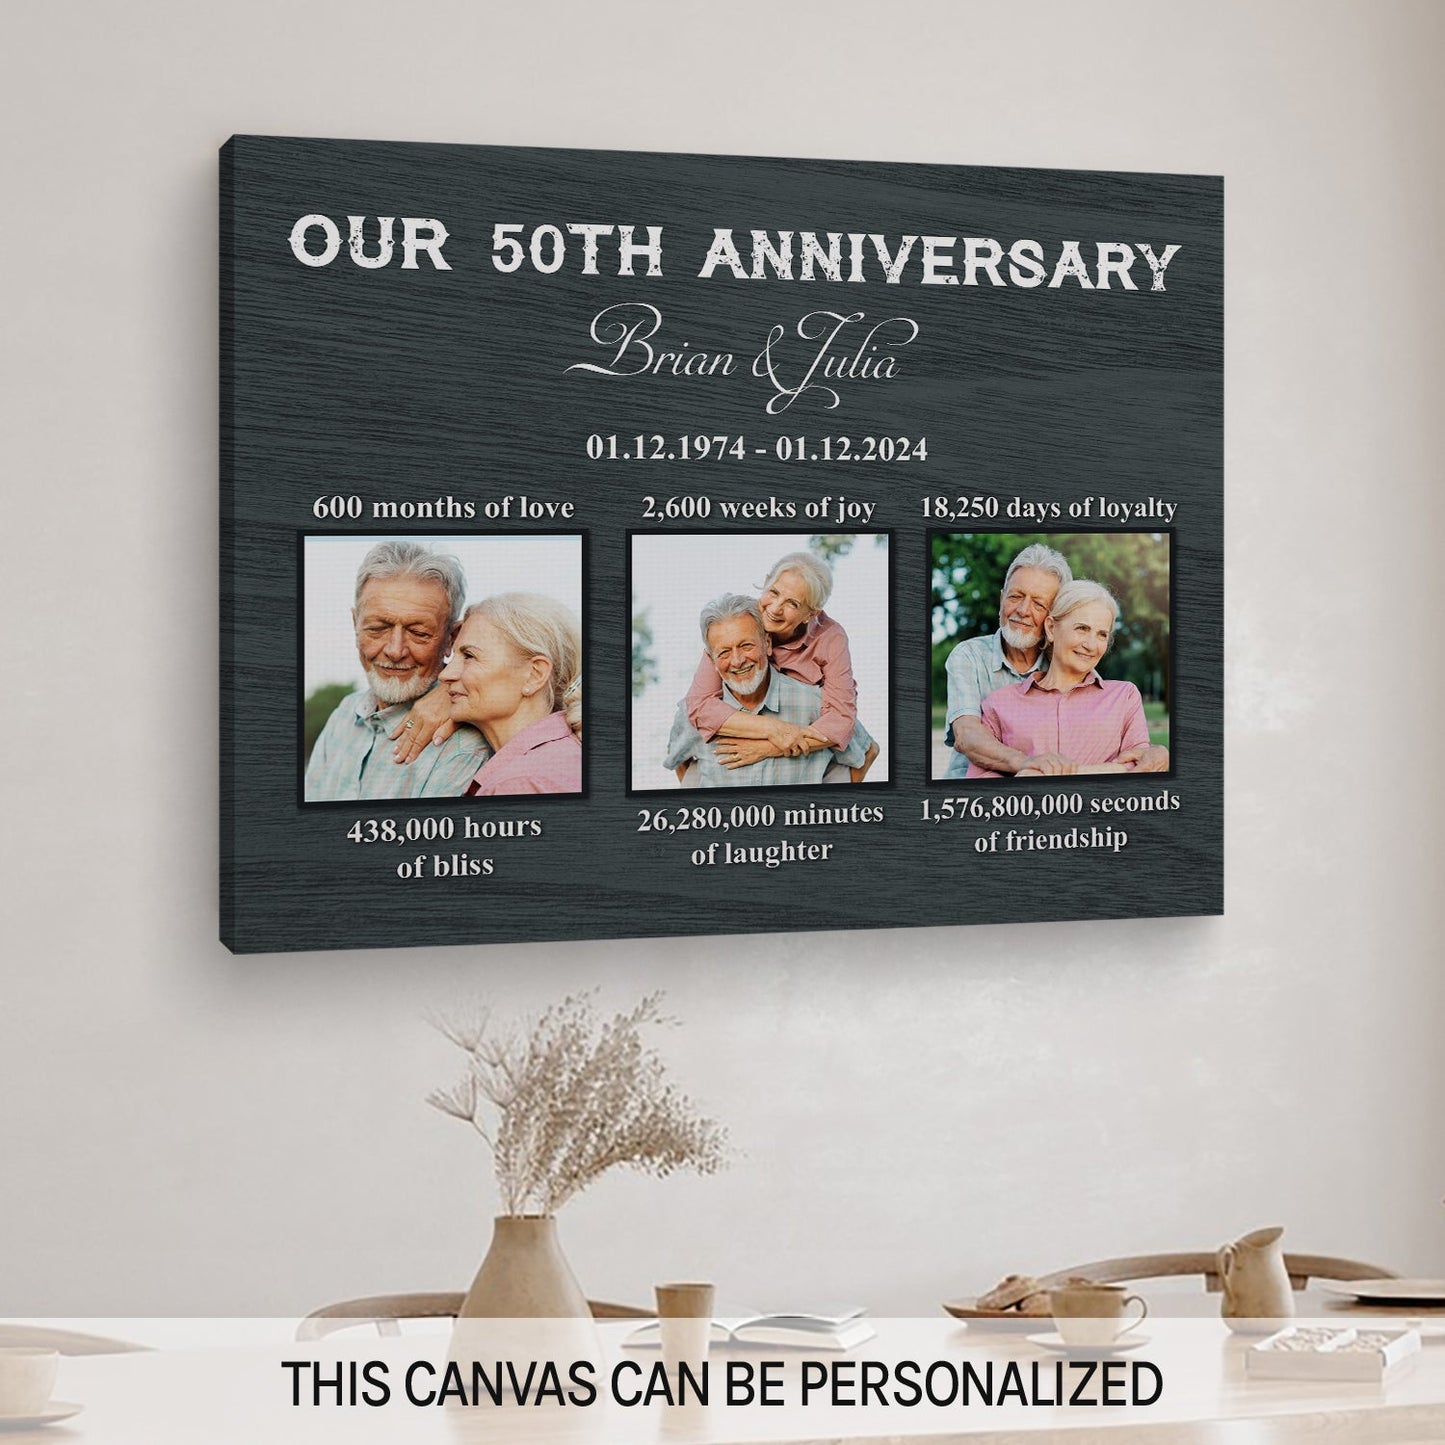 Our 50th Anniversary - Personalized 50 Year Anniversary gift For Husband or Wife - Custom Canvas Print - MyMindfulGifts